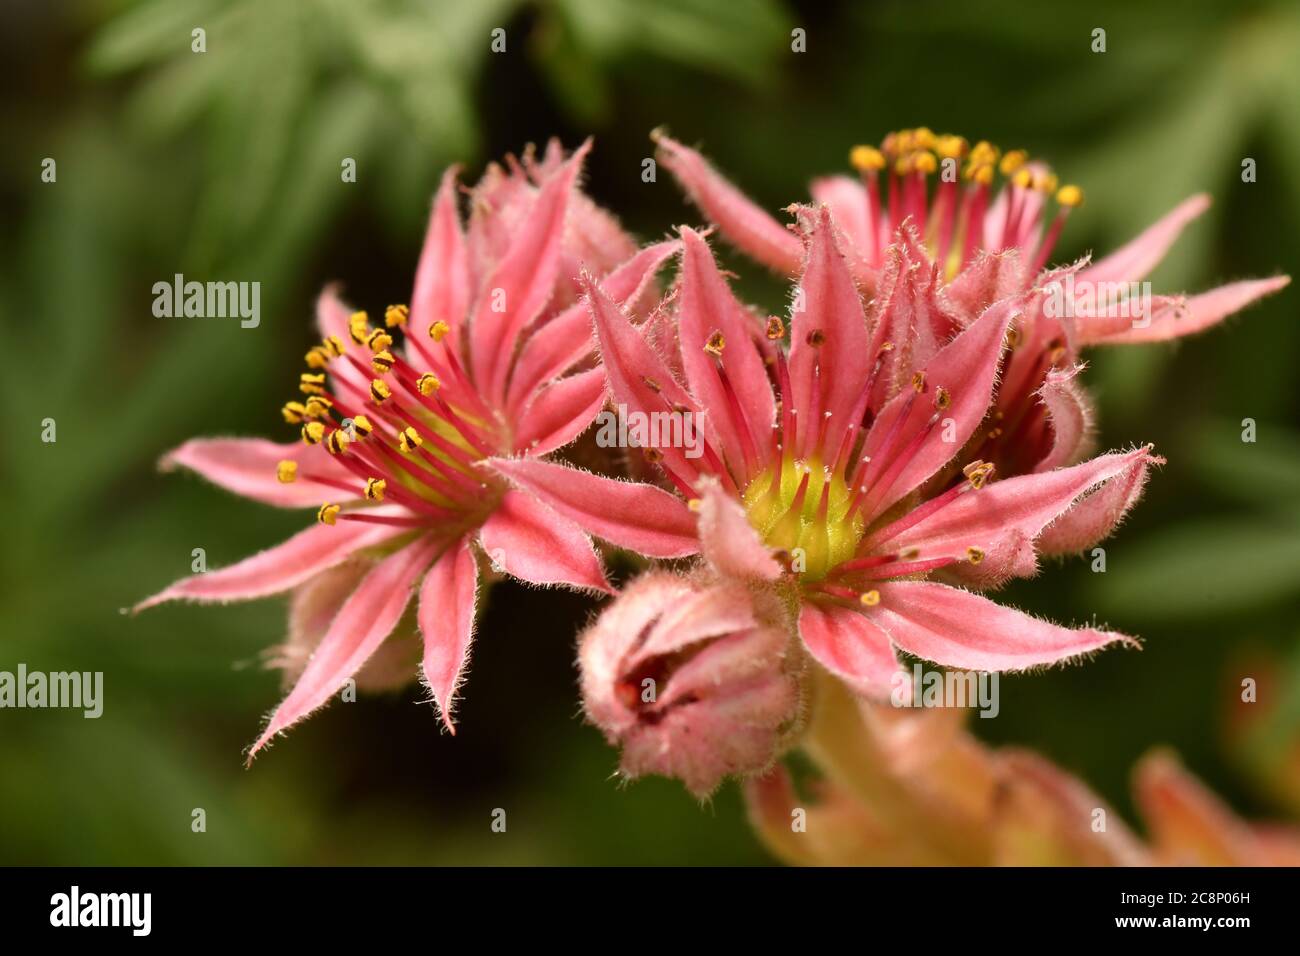 Close-up of the flower of Sempervivum, Jobivara  ‘Red Tips’,succulent perennial evergreen rosettes with fleshy green leaves. Stock Photo